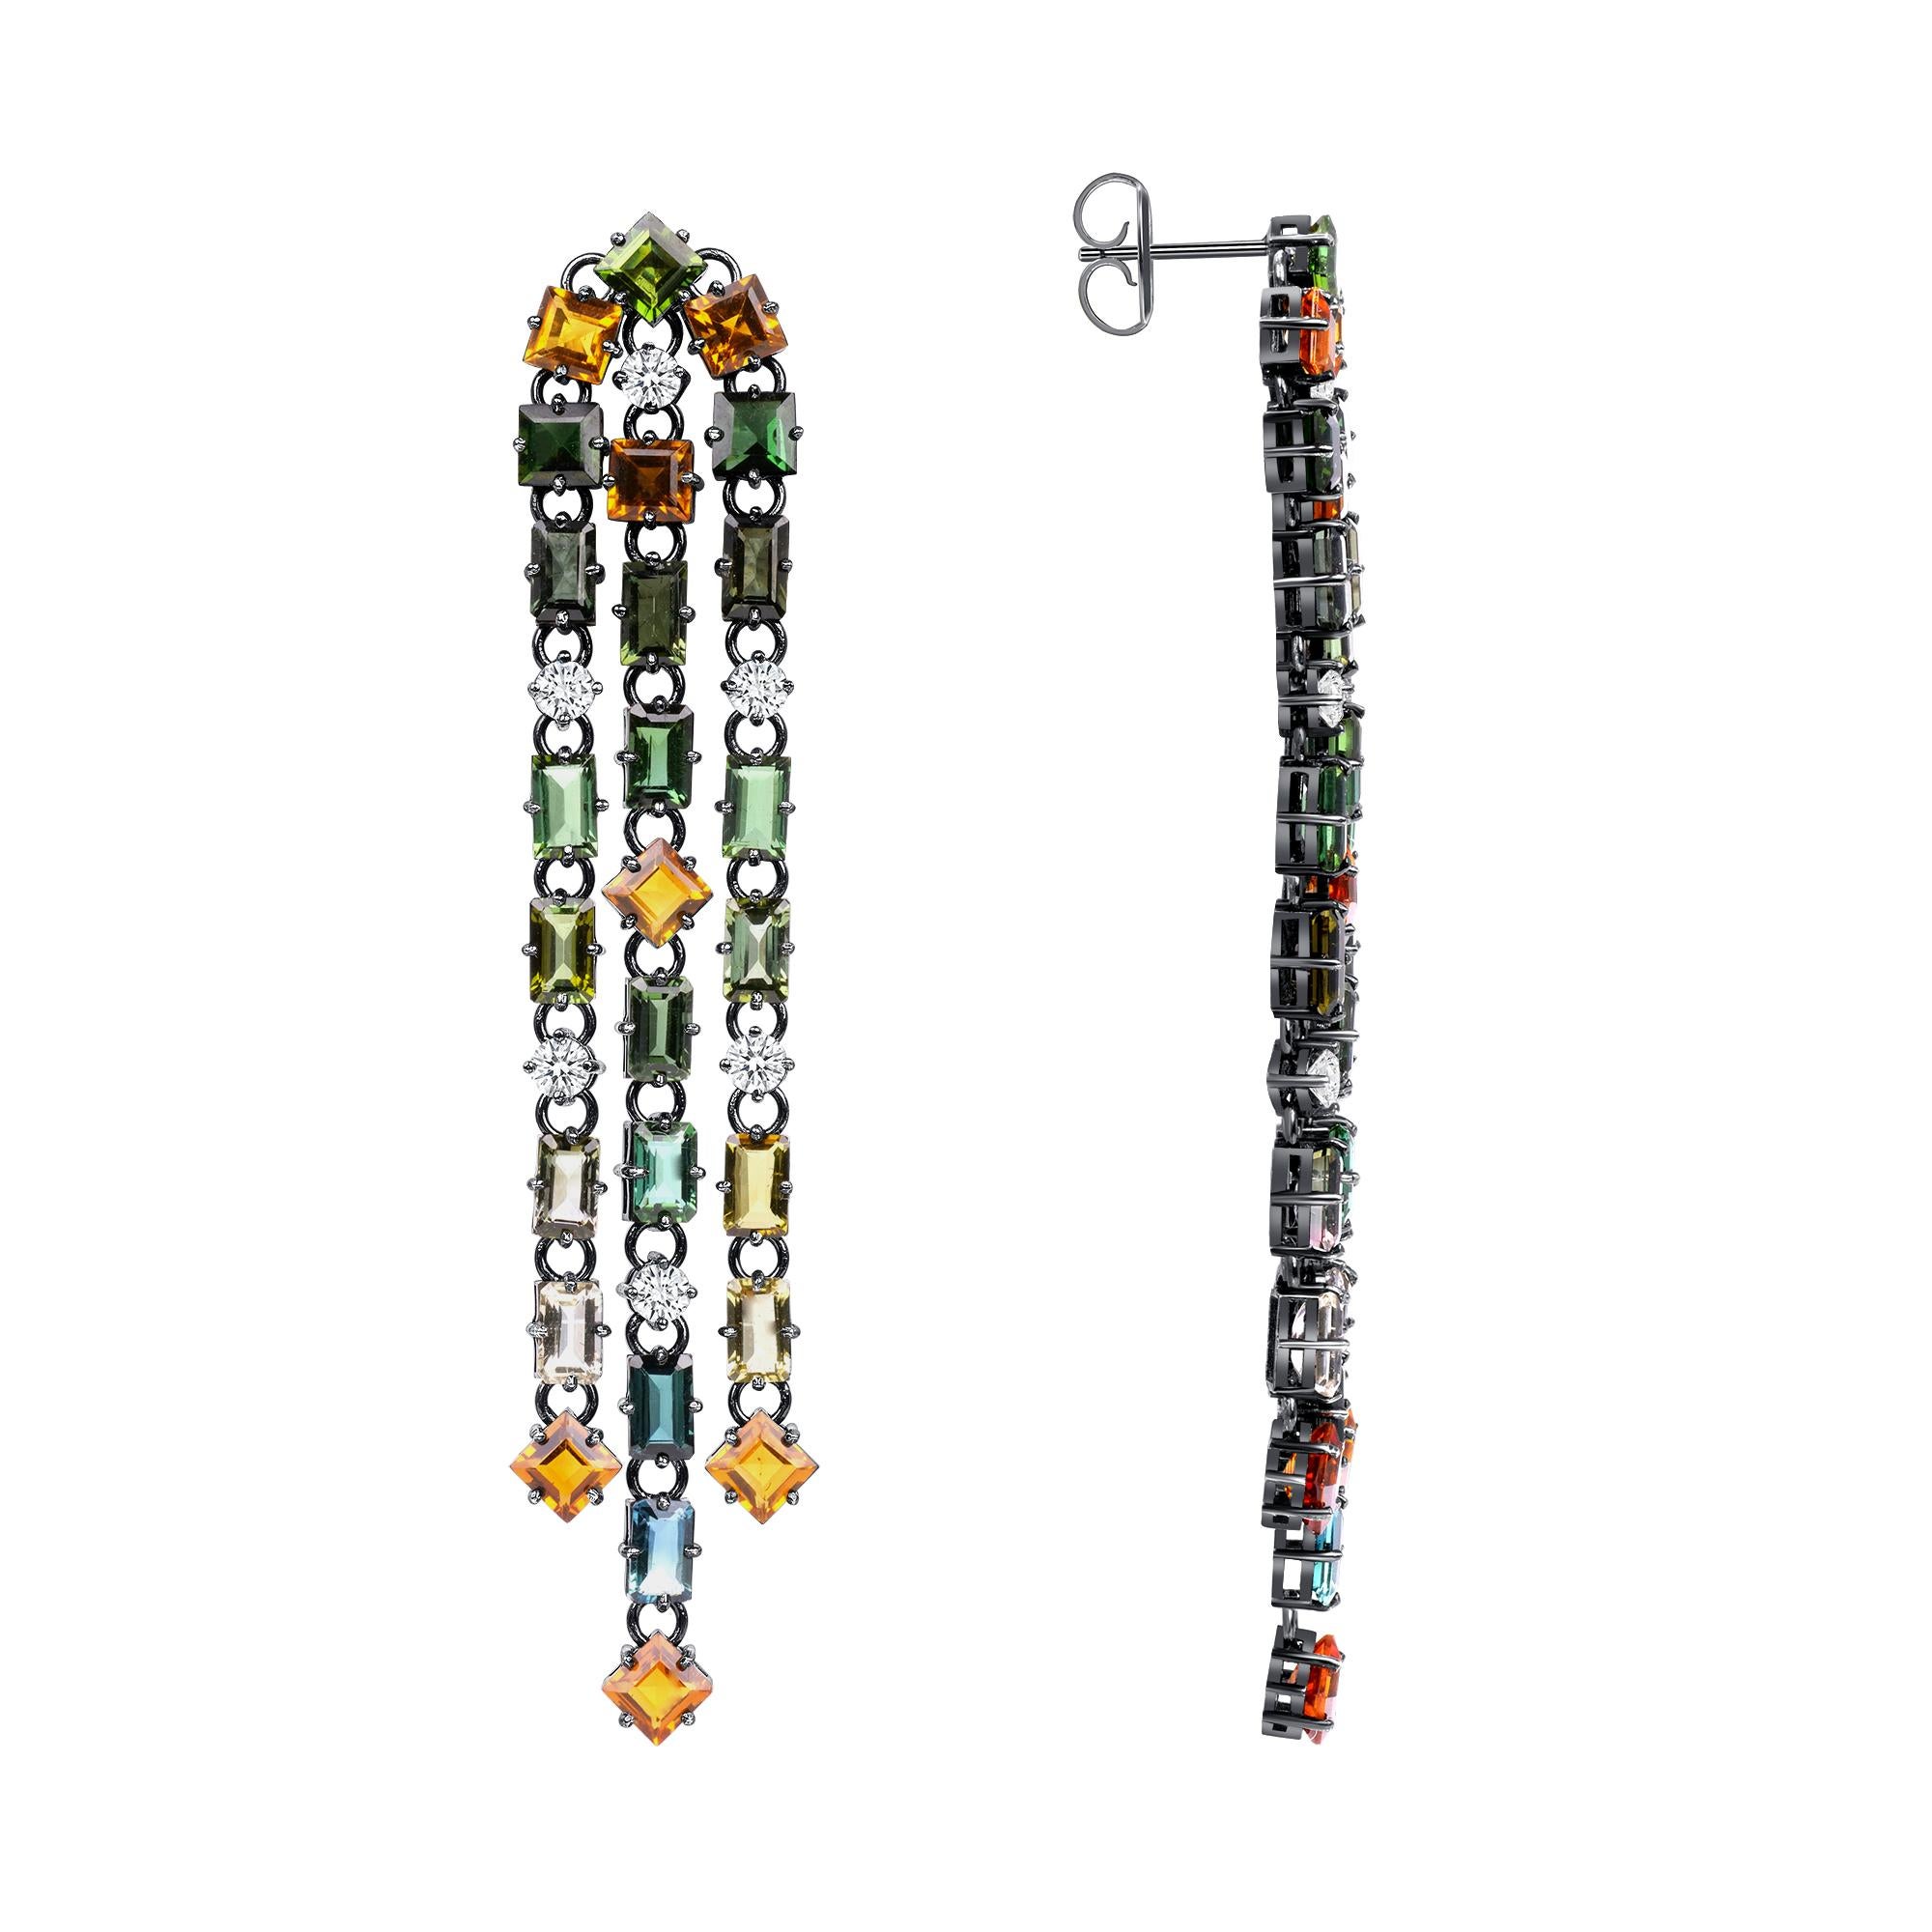 17.124 Carat Tourmaline, Citrine, Diamond, Gold Dangle Earrings, In Stock.
These waterfall dangle earrings are made with 17.124 carat total weight square cut tourmalines, 3.416 carat total weight square cut citrines, 1.12-carat total weight